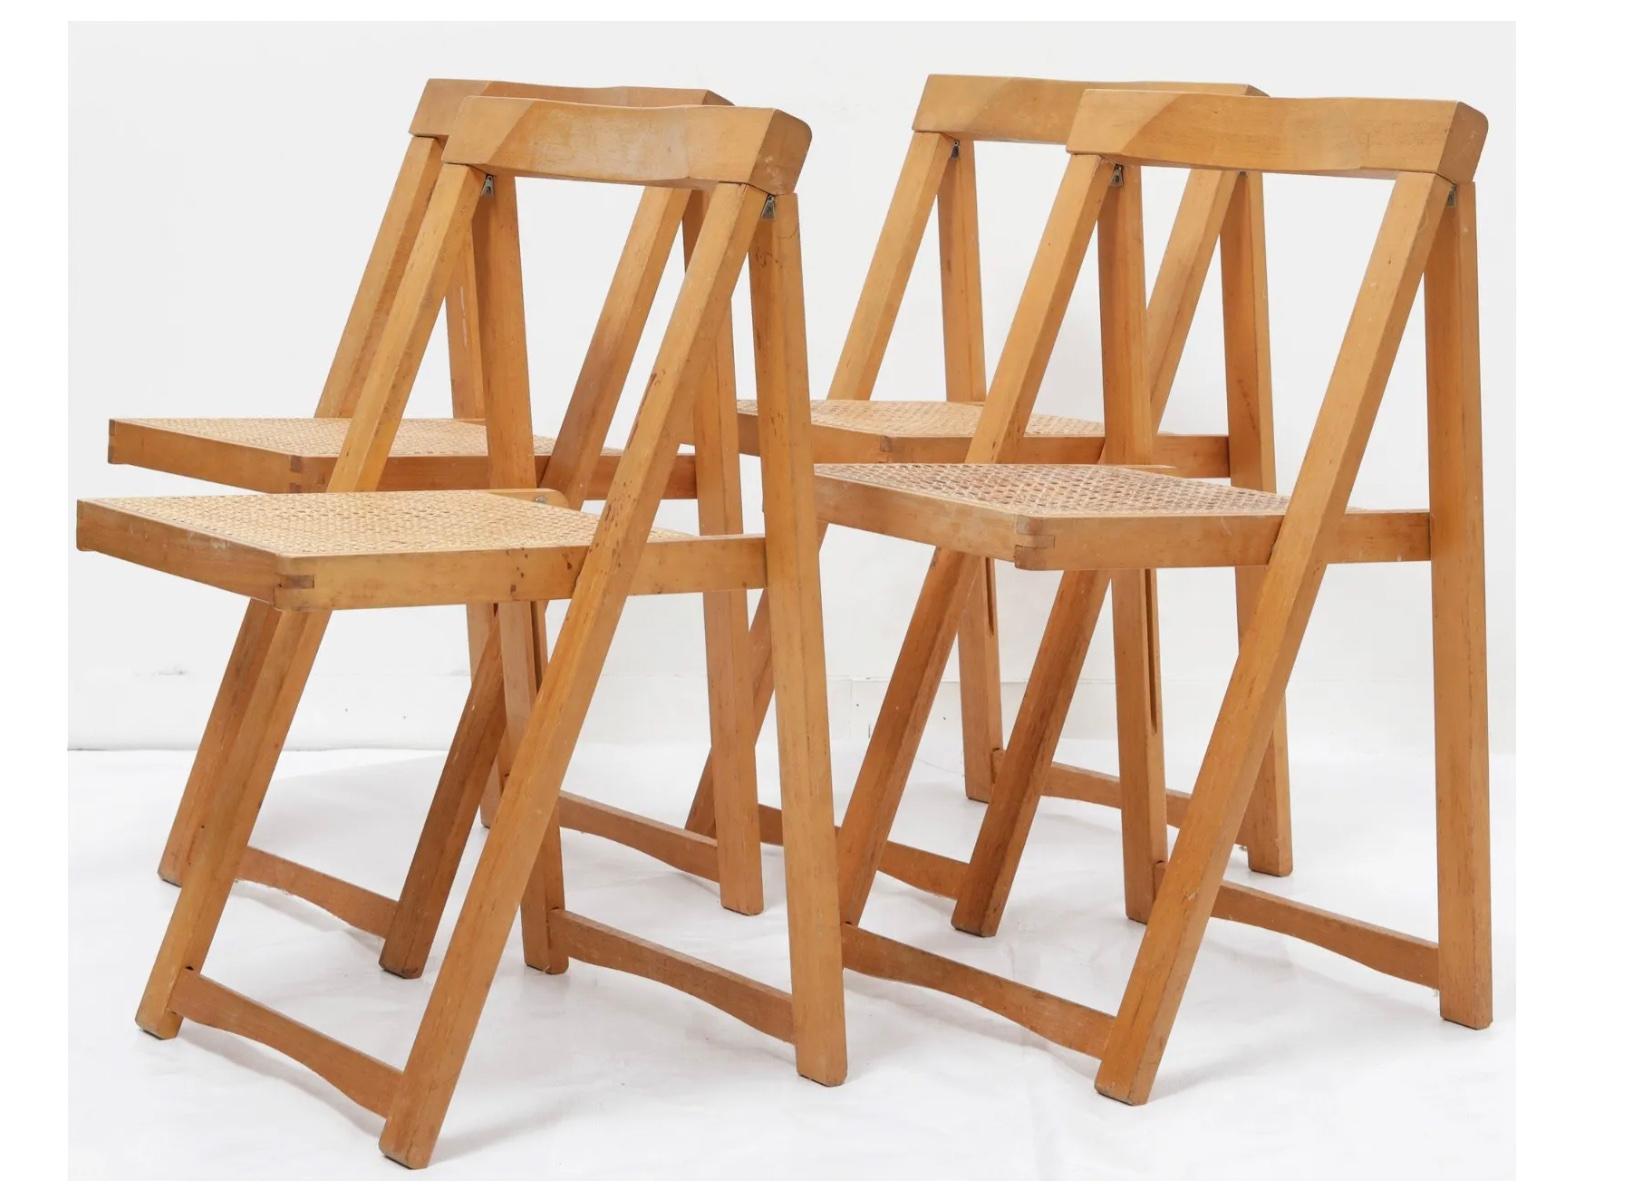 Set of 4 Mid century Blonde wood Folding Chair with Cane Seat By Aldo Jacober Circa 1960. Very sturdy and solid. Stack flat as seen in photos.

Sold as a set of (4) Chairs

